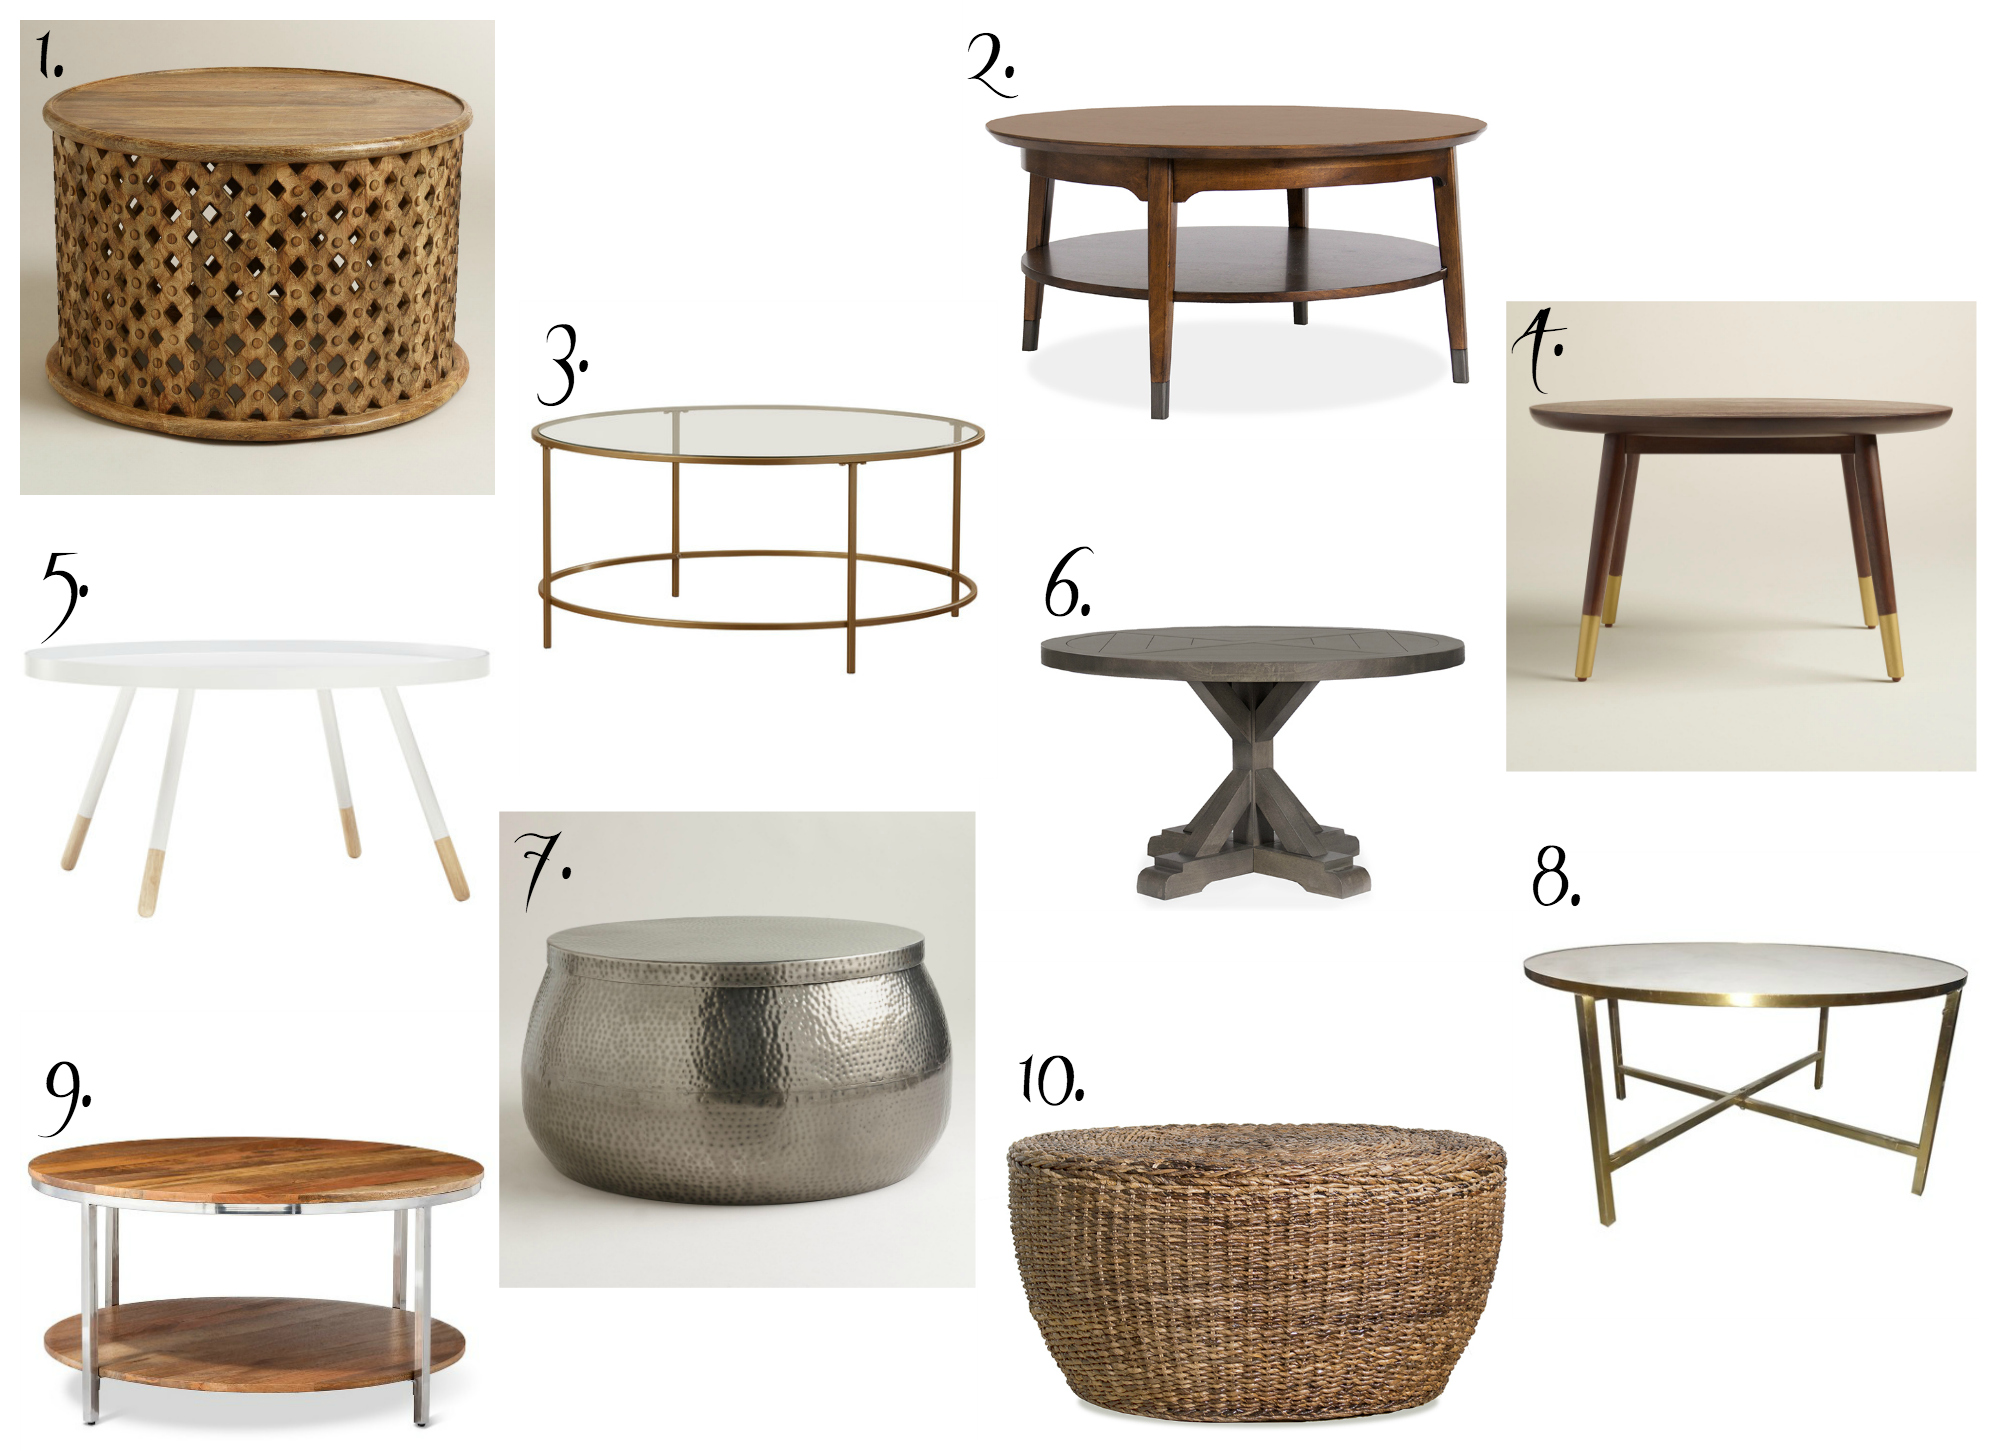 Affordable Round Coffee Tables - The Chronicles of Home